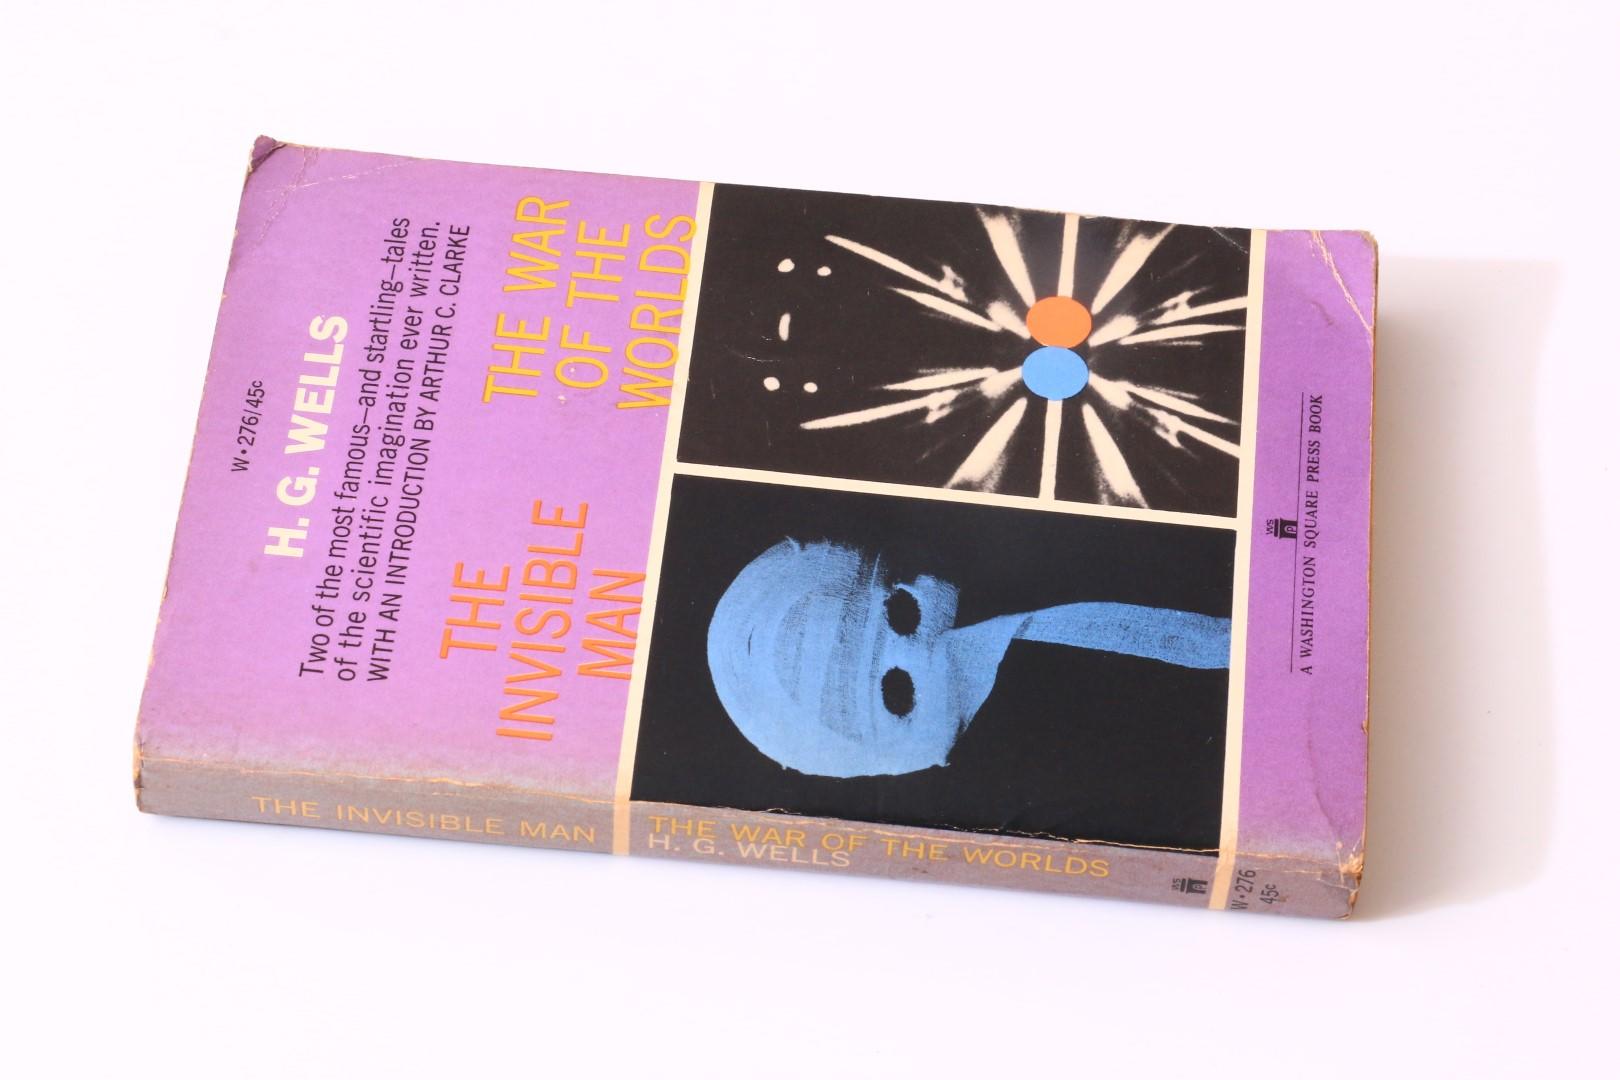 H.G. Wells [intro. Arthur C. Clarke] - The Invisible Man w/ The War of the Worlds - Washington Square Press, 1962, Later Edition. Signed